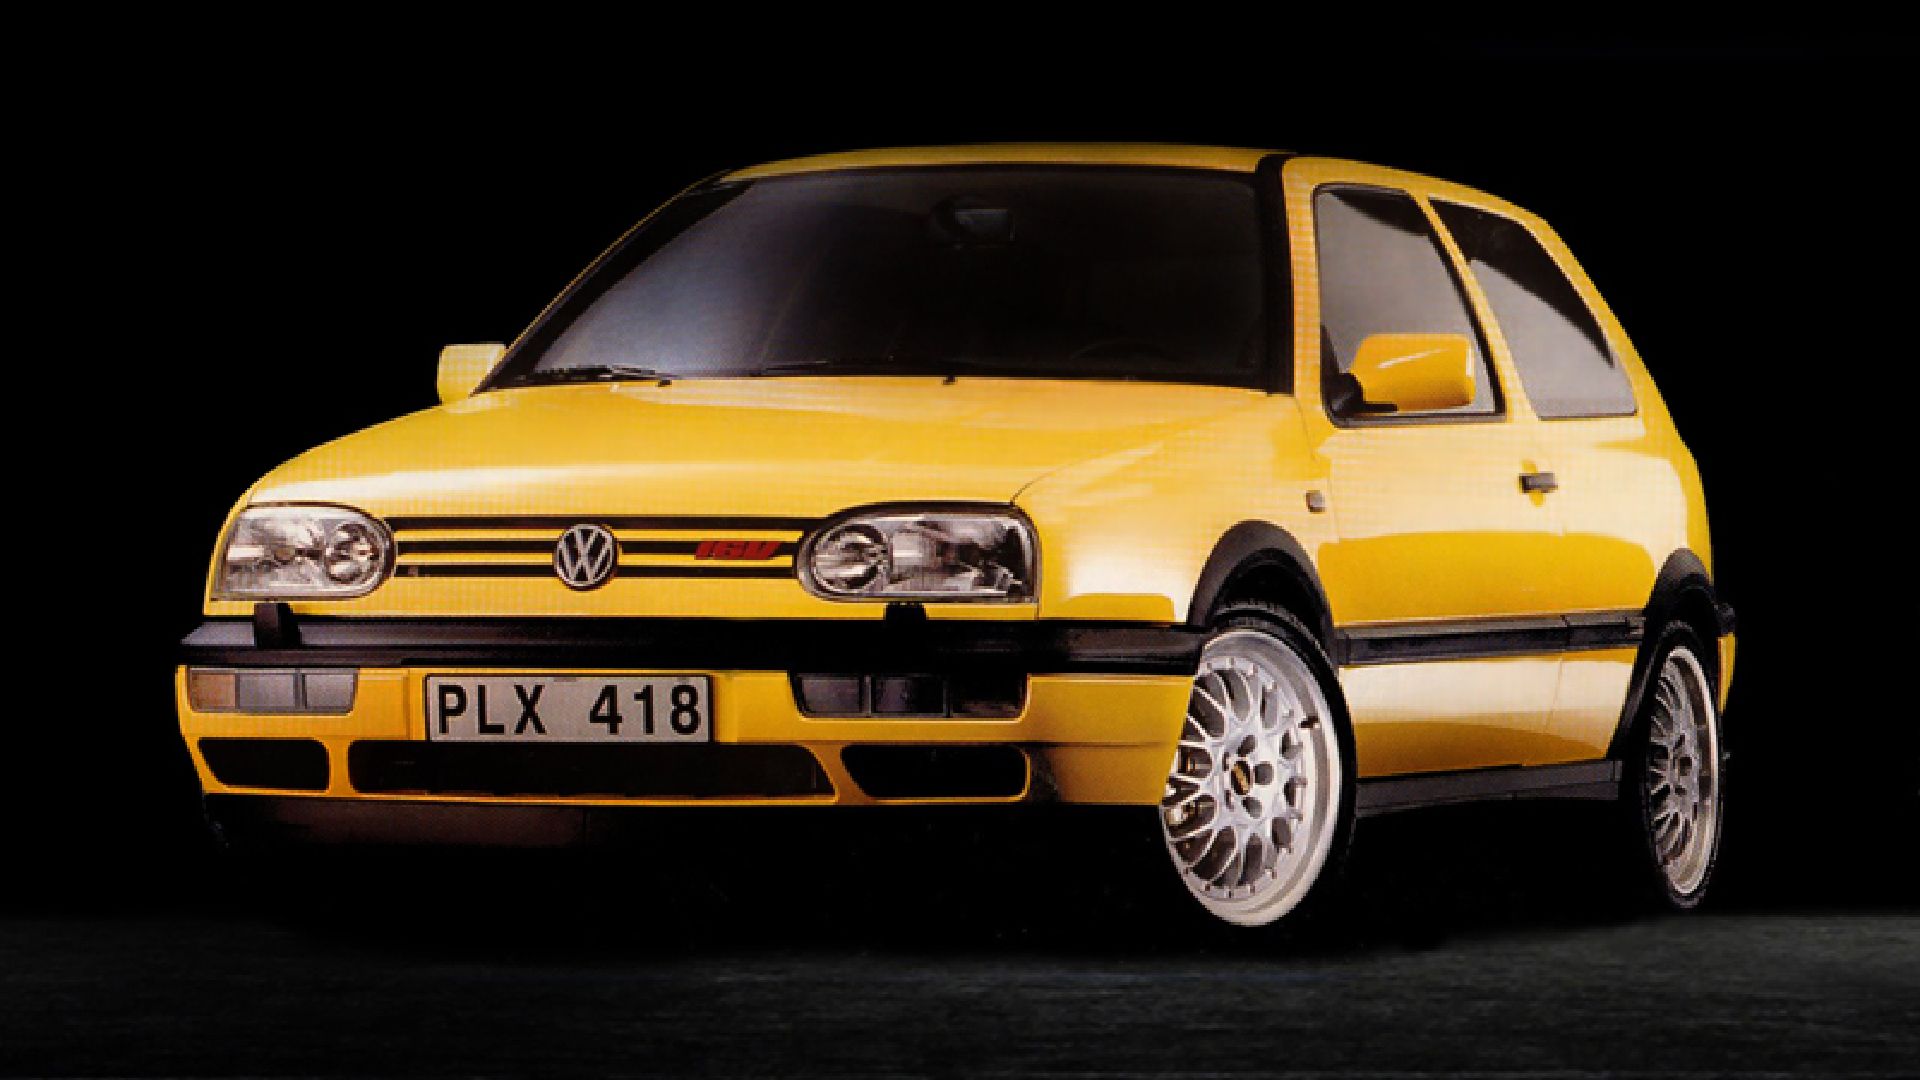 Volkswagen Golf Gti Revealed The History Of A Hot Hatch